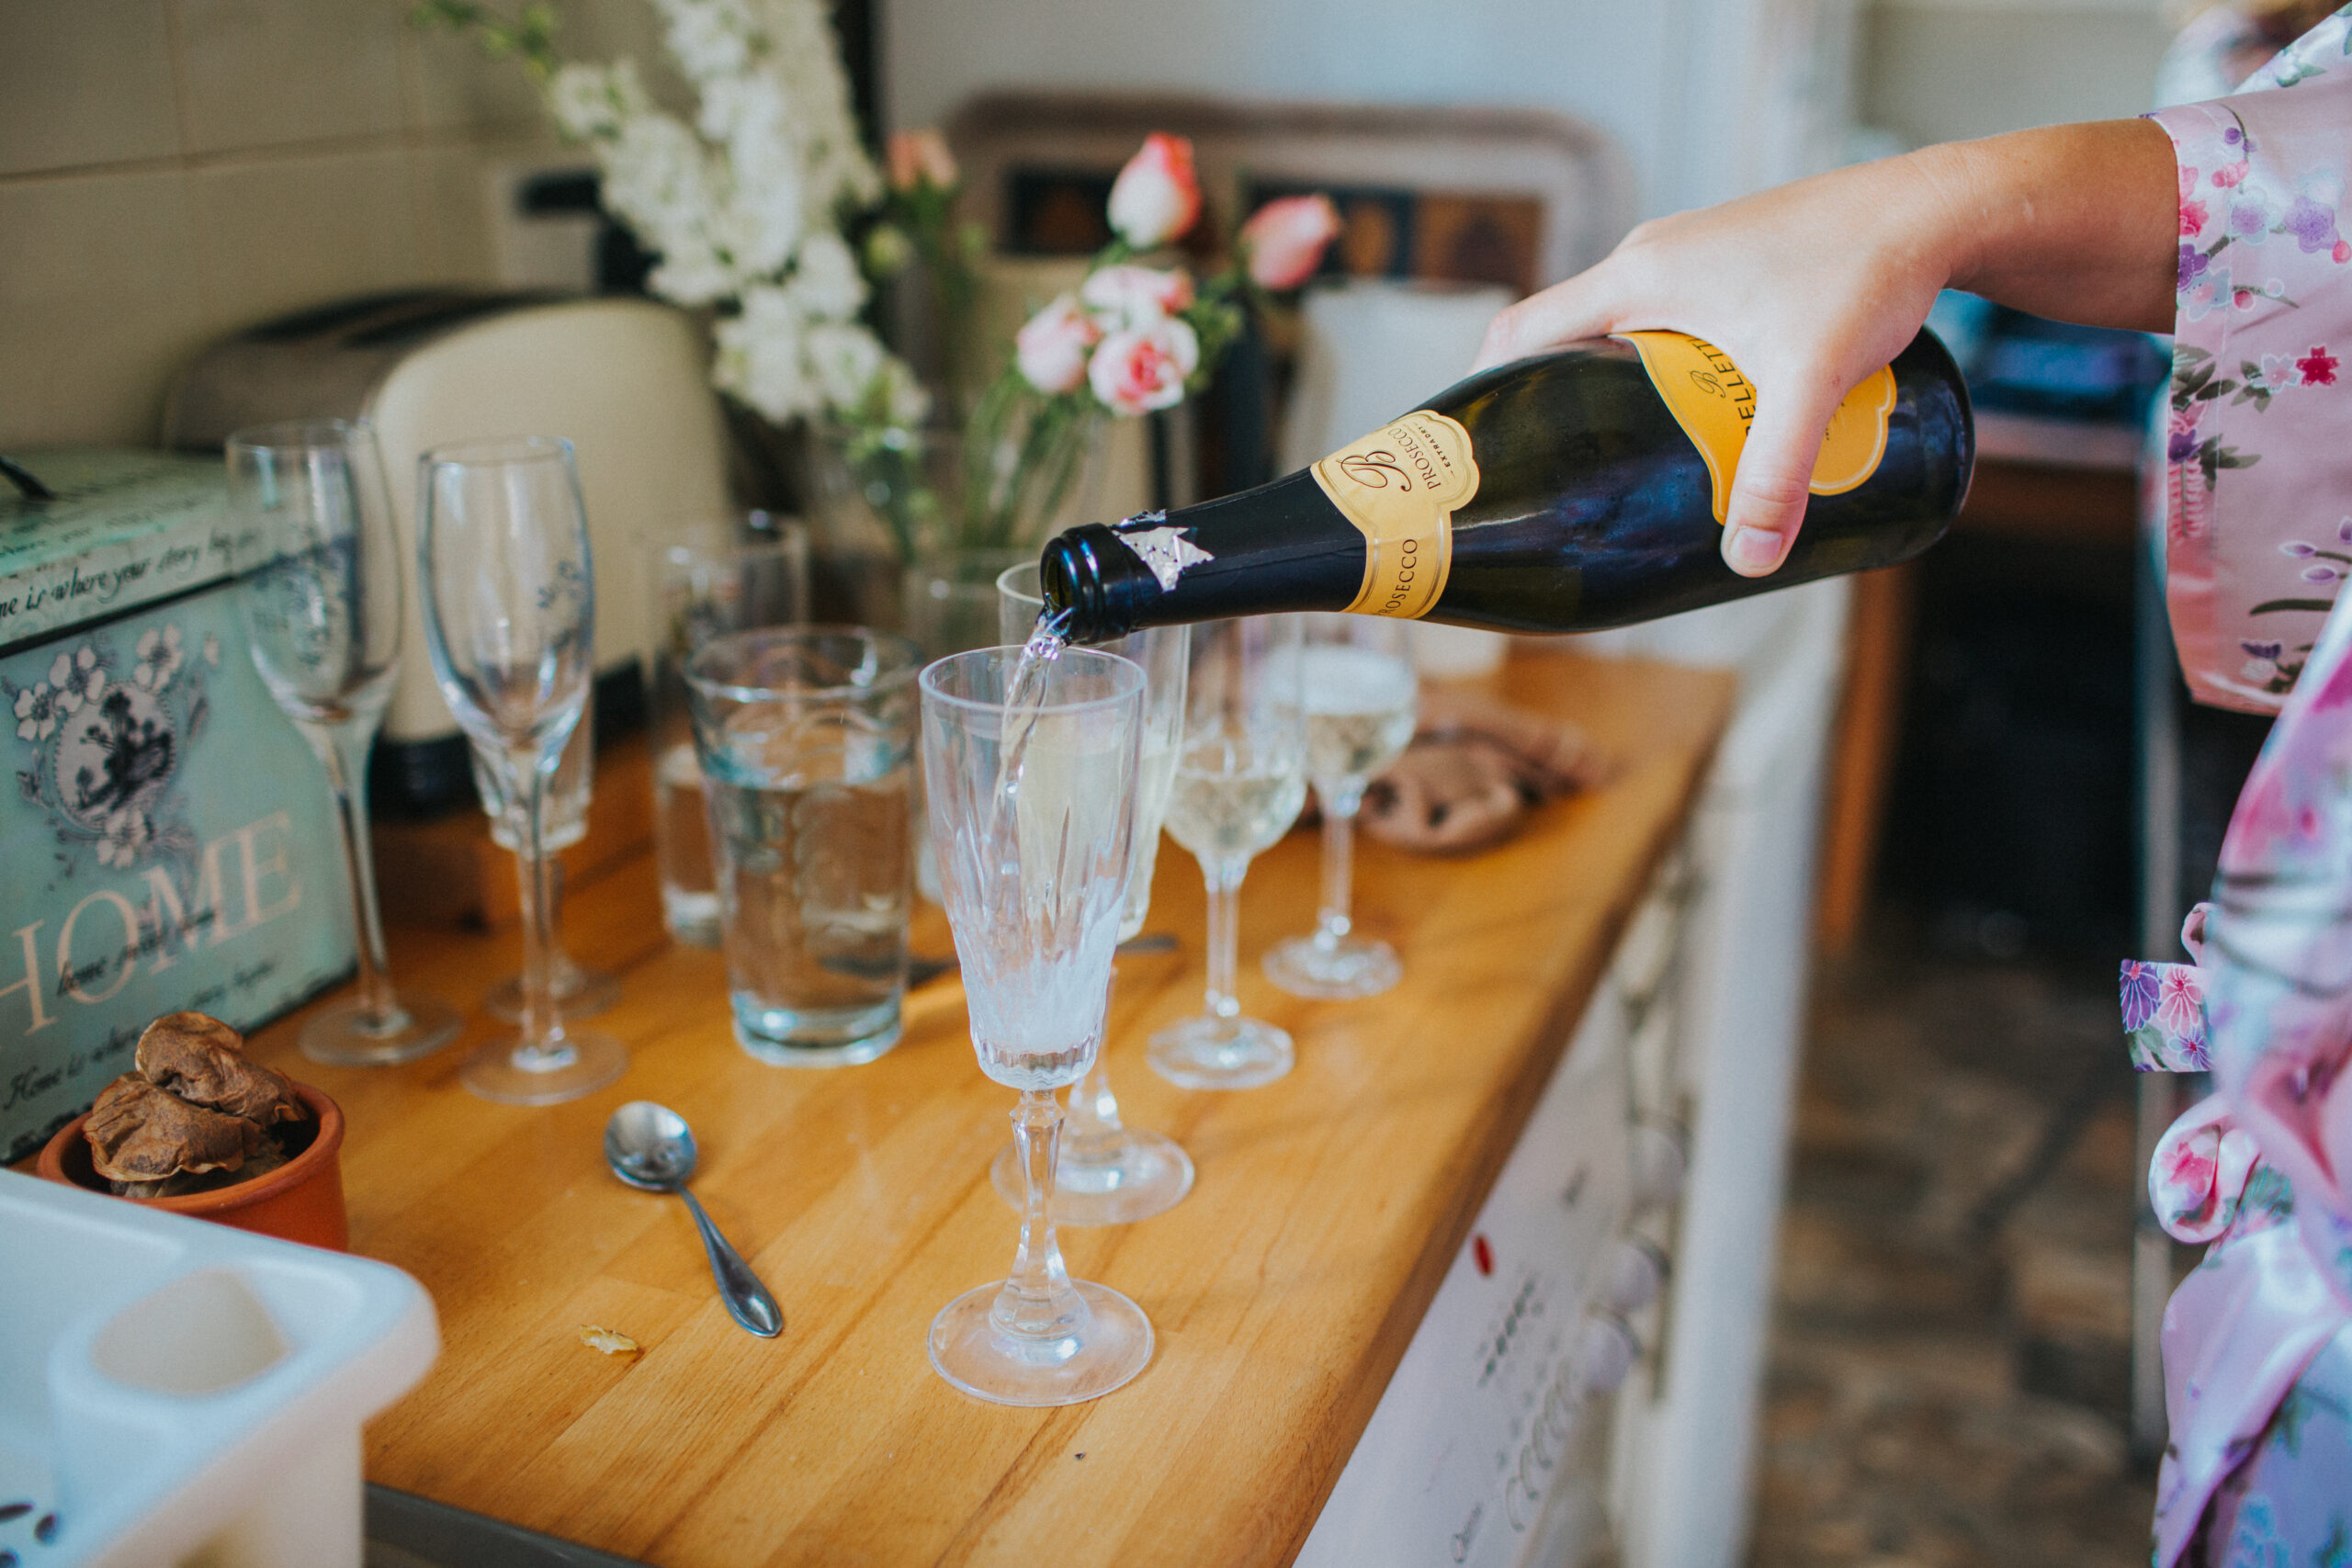 prosecco being poured ahead of the wedding